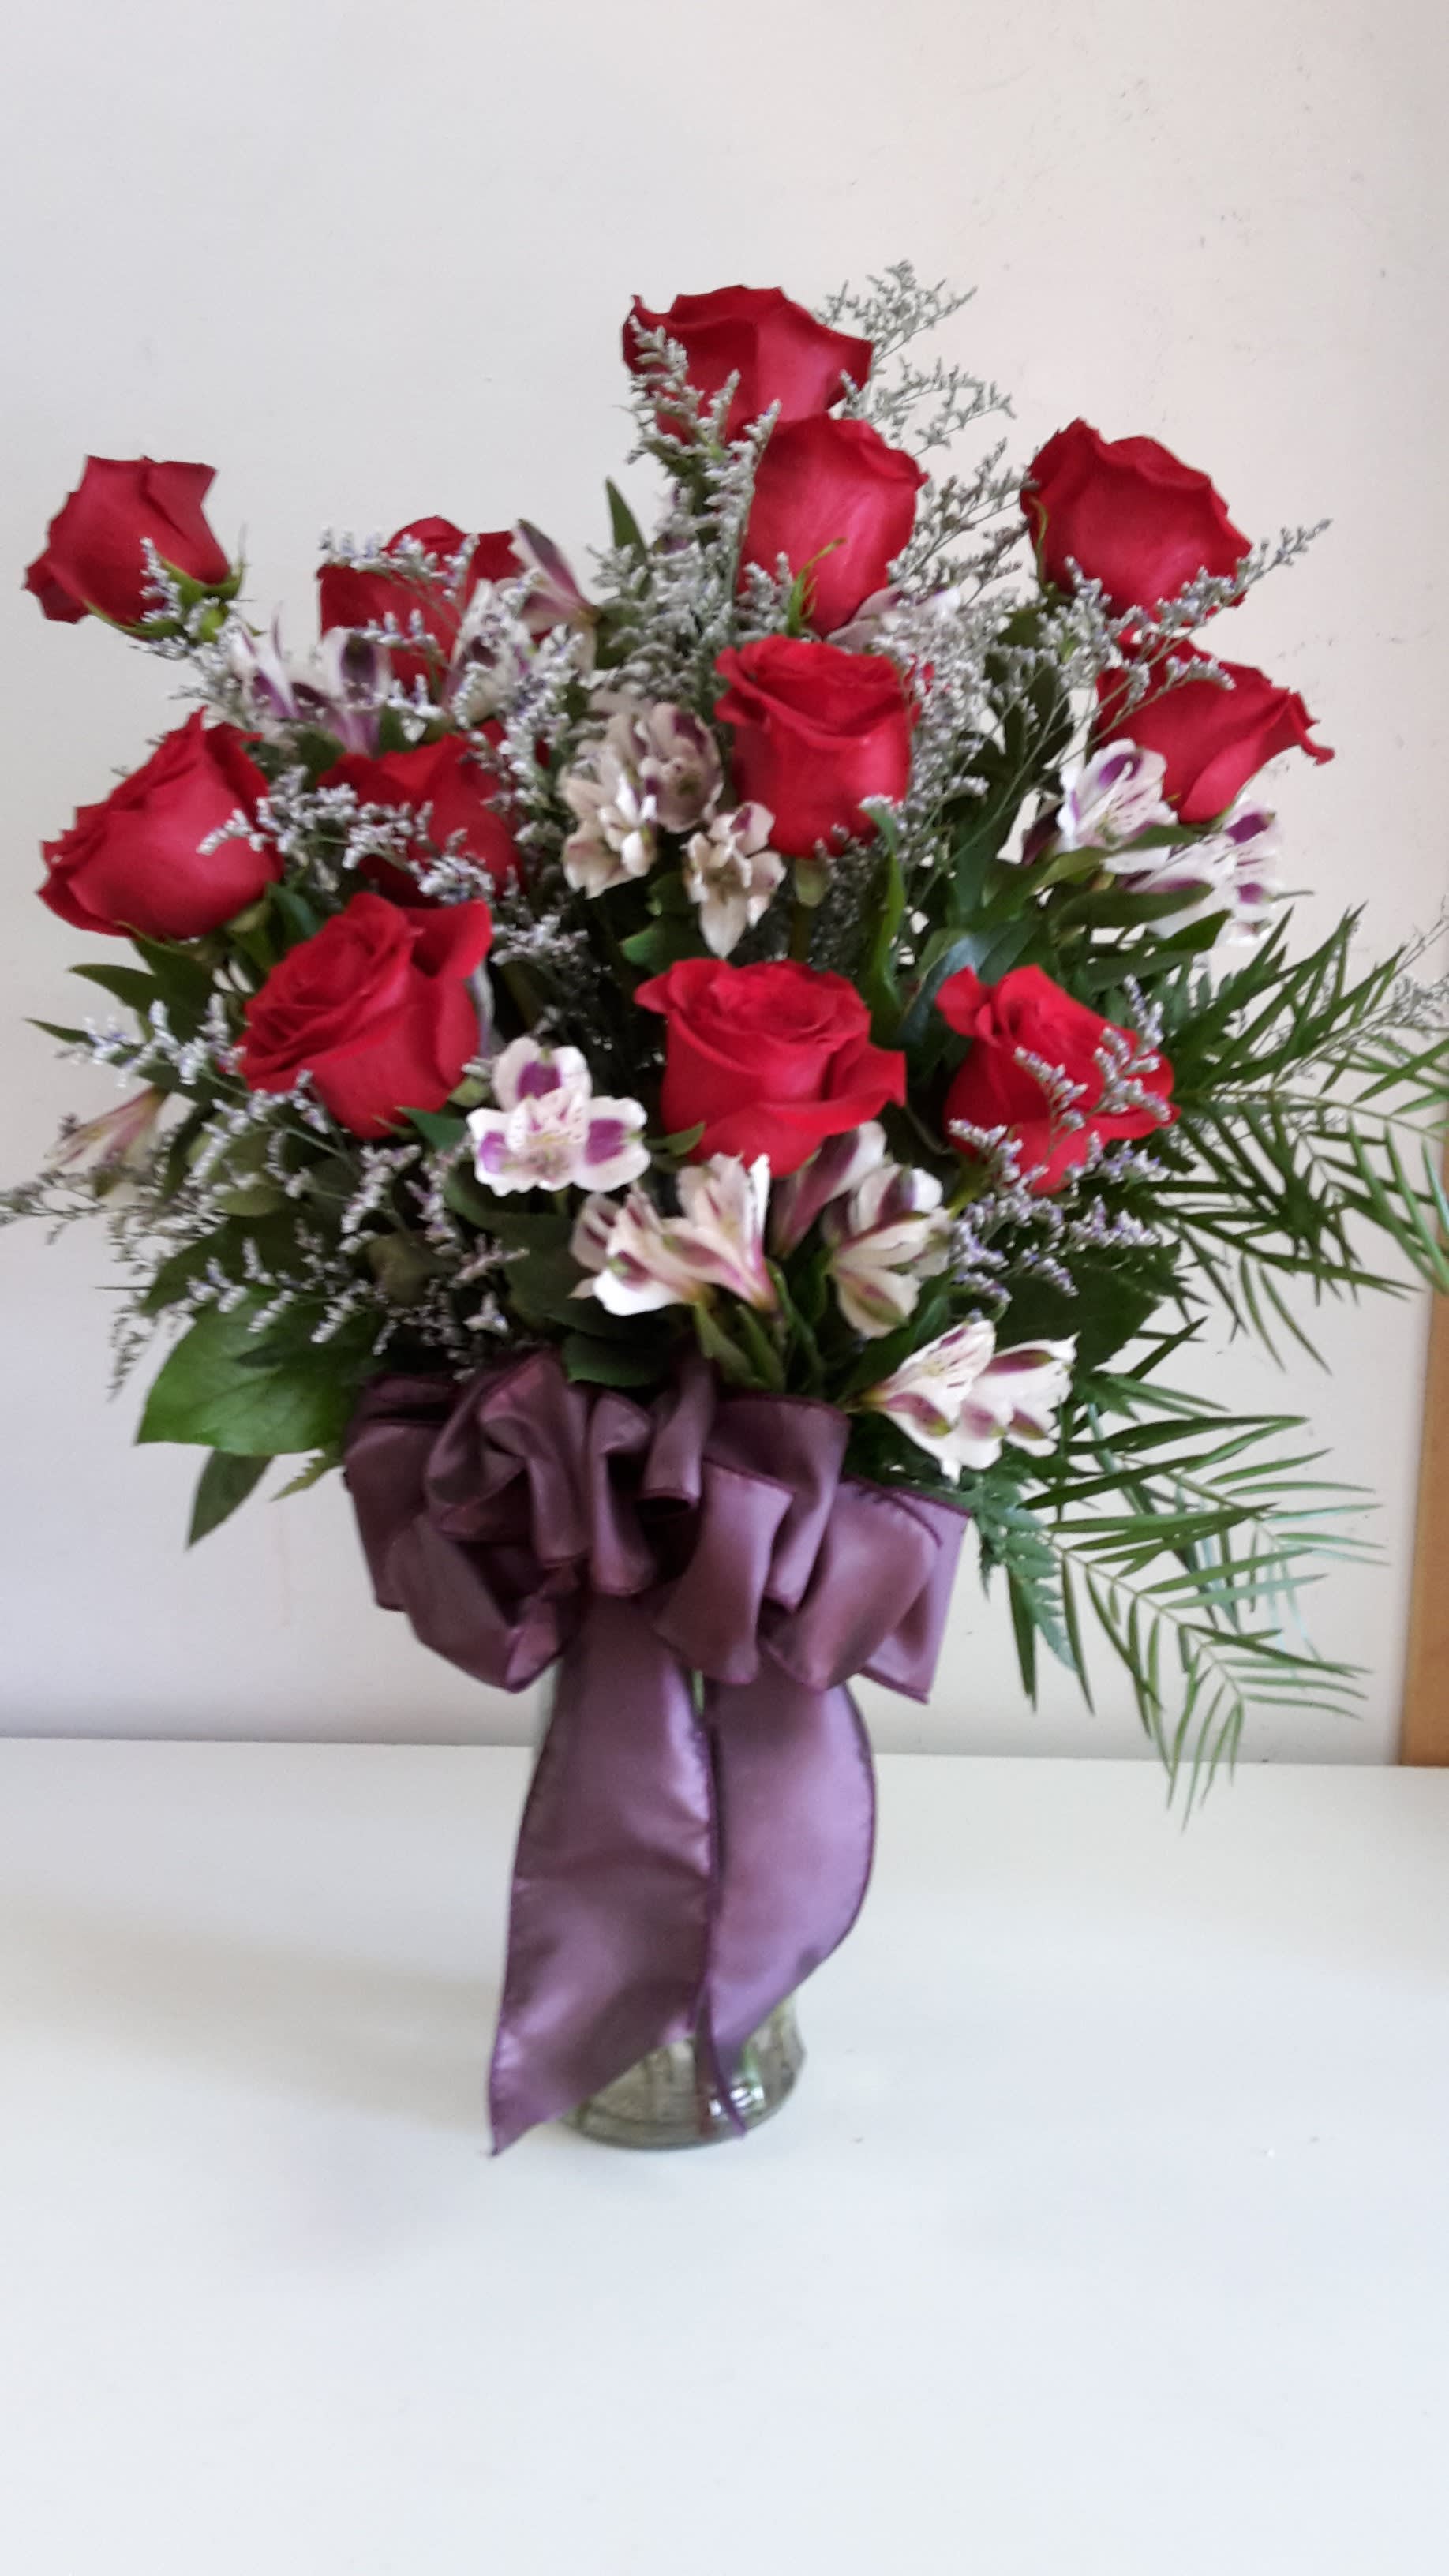 A Dozen Deluxe Roses - For the perfect, traditional Valentine’s Day bouquet – or for a birthday, anniversary or other special day – this bouquet of a dozen red roses adorned with a classic mix of accent flowers and greenery is a classic gift of love. Send it today, and she’ll love you forever. Available in many colors.